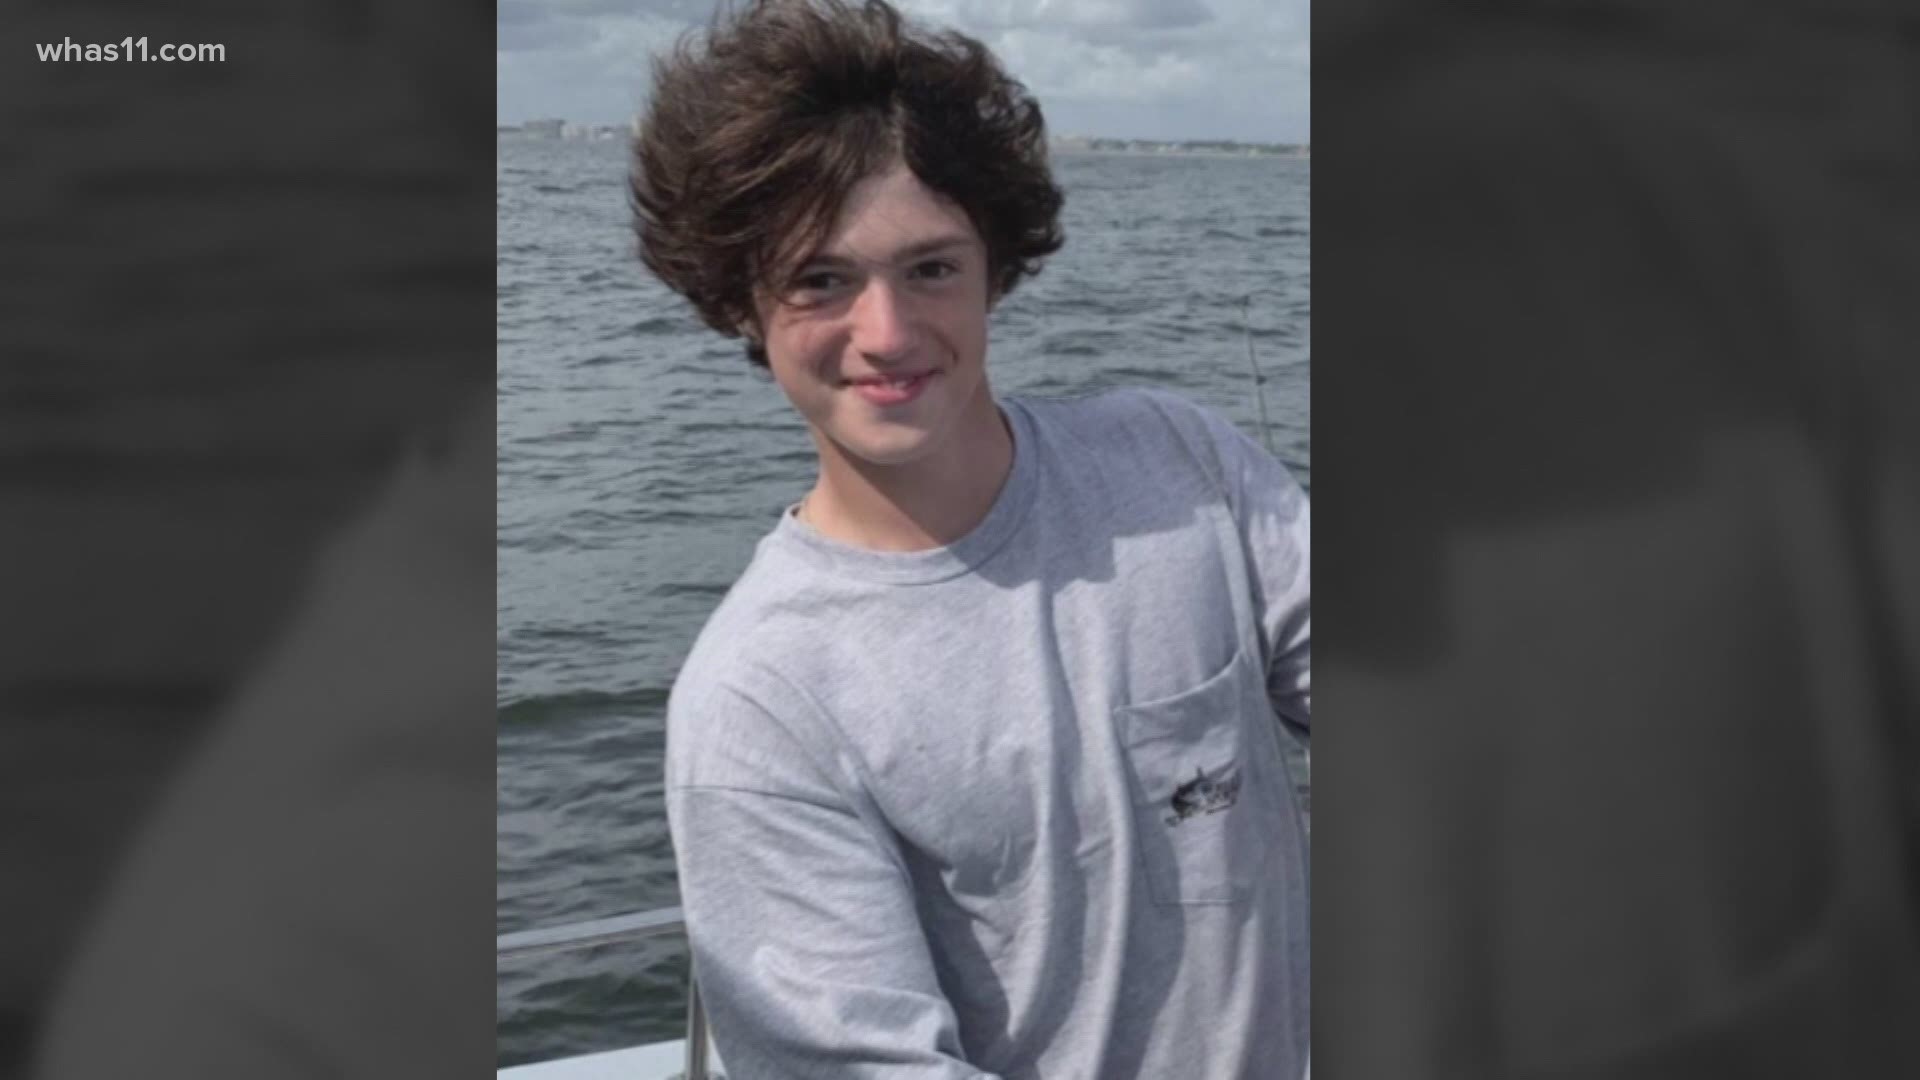 Jacob Stover, disappeared 3 days ago while on the Ohio river kayaking. Just after 10 a.m. Sunday, he was last seen just under the 2nd Street Bridge.